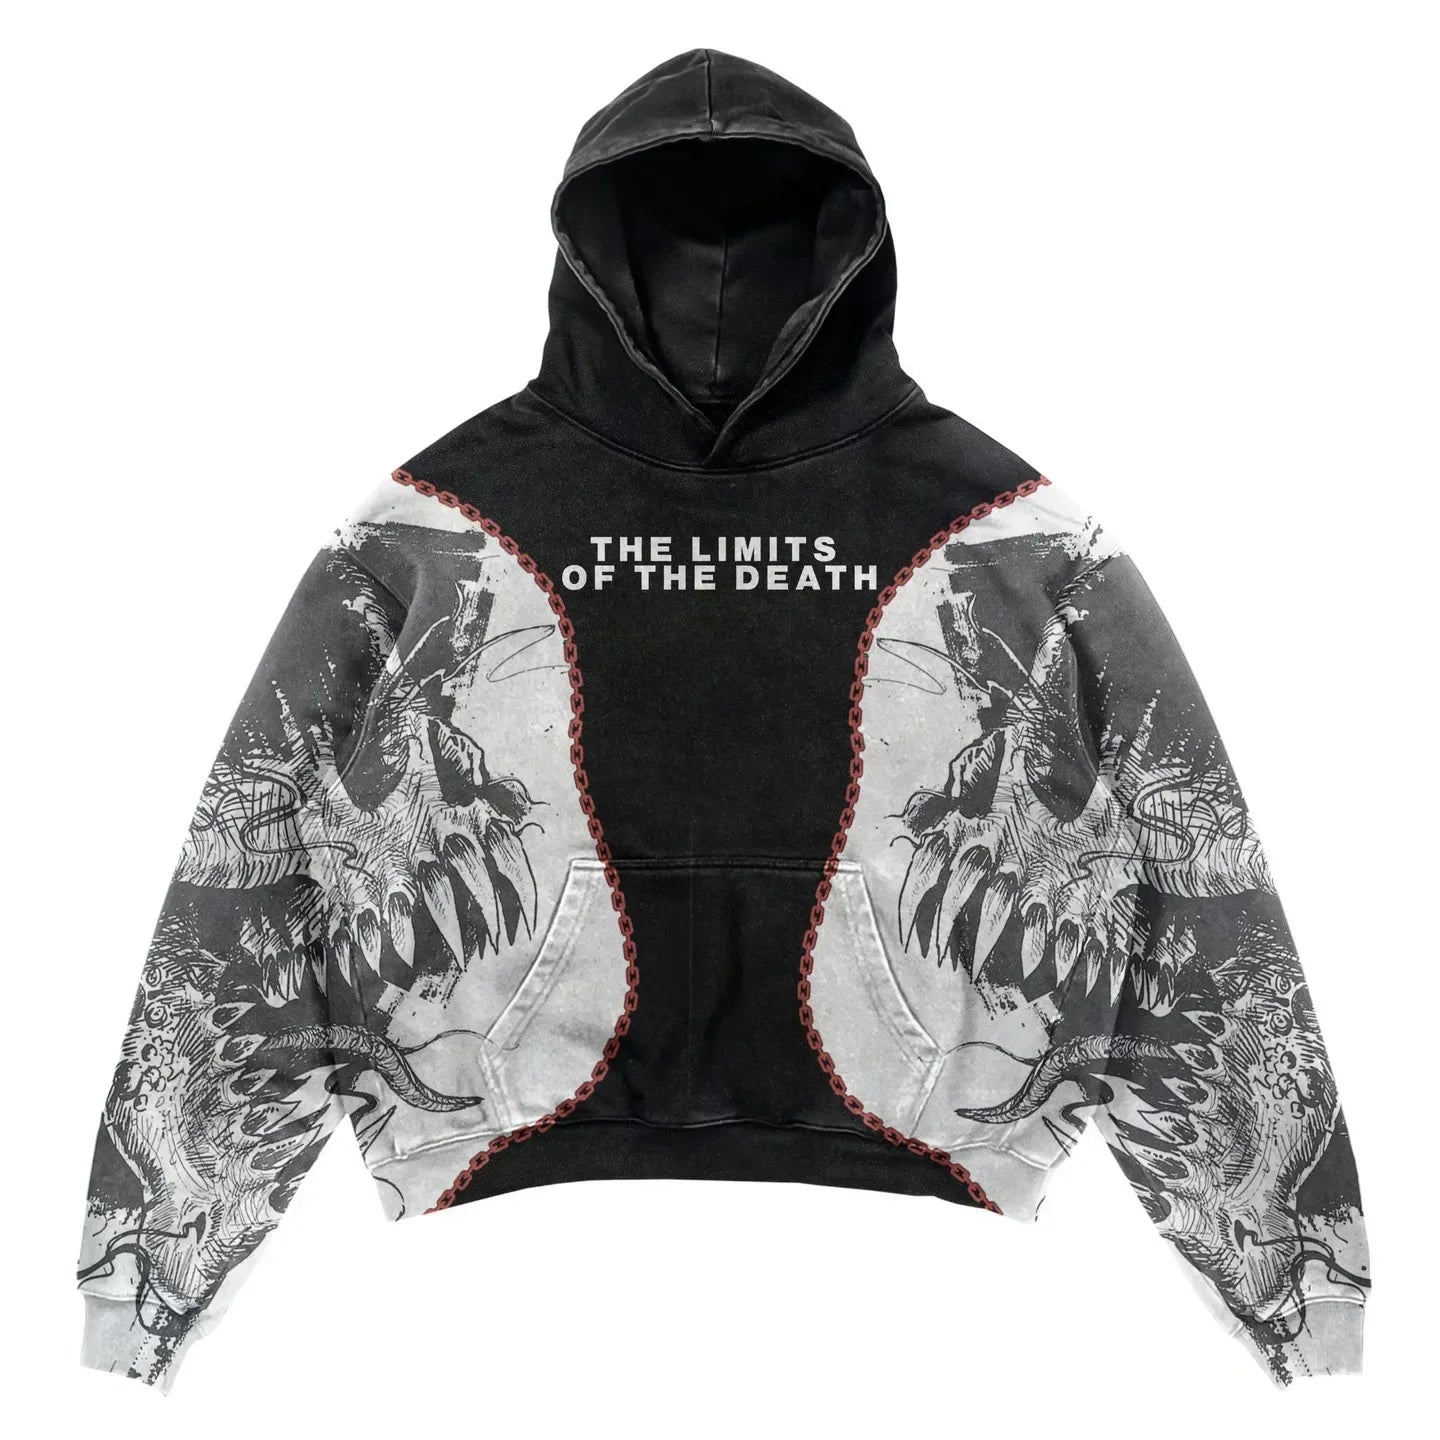 A black polyester hoodie with a graphic design of fanged jaws on the front and sleeves, and the text "THE LIMITS OF THE DEATH" across the chest. This Maramalive™ Explosions Printed Skull Y2K Retro Hooded Sweater Coat Street Style Gothic Casual Fashion Hooded Sweater Men's Female adds an edgy vibe to any wardrobe.